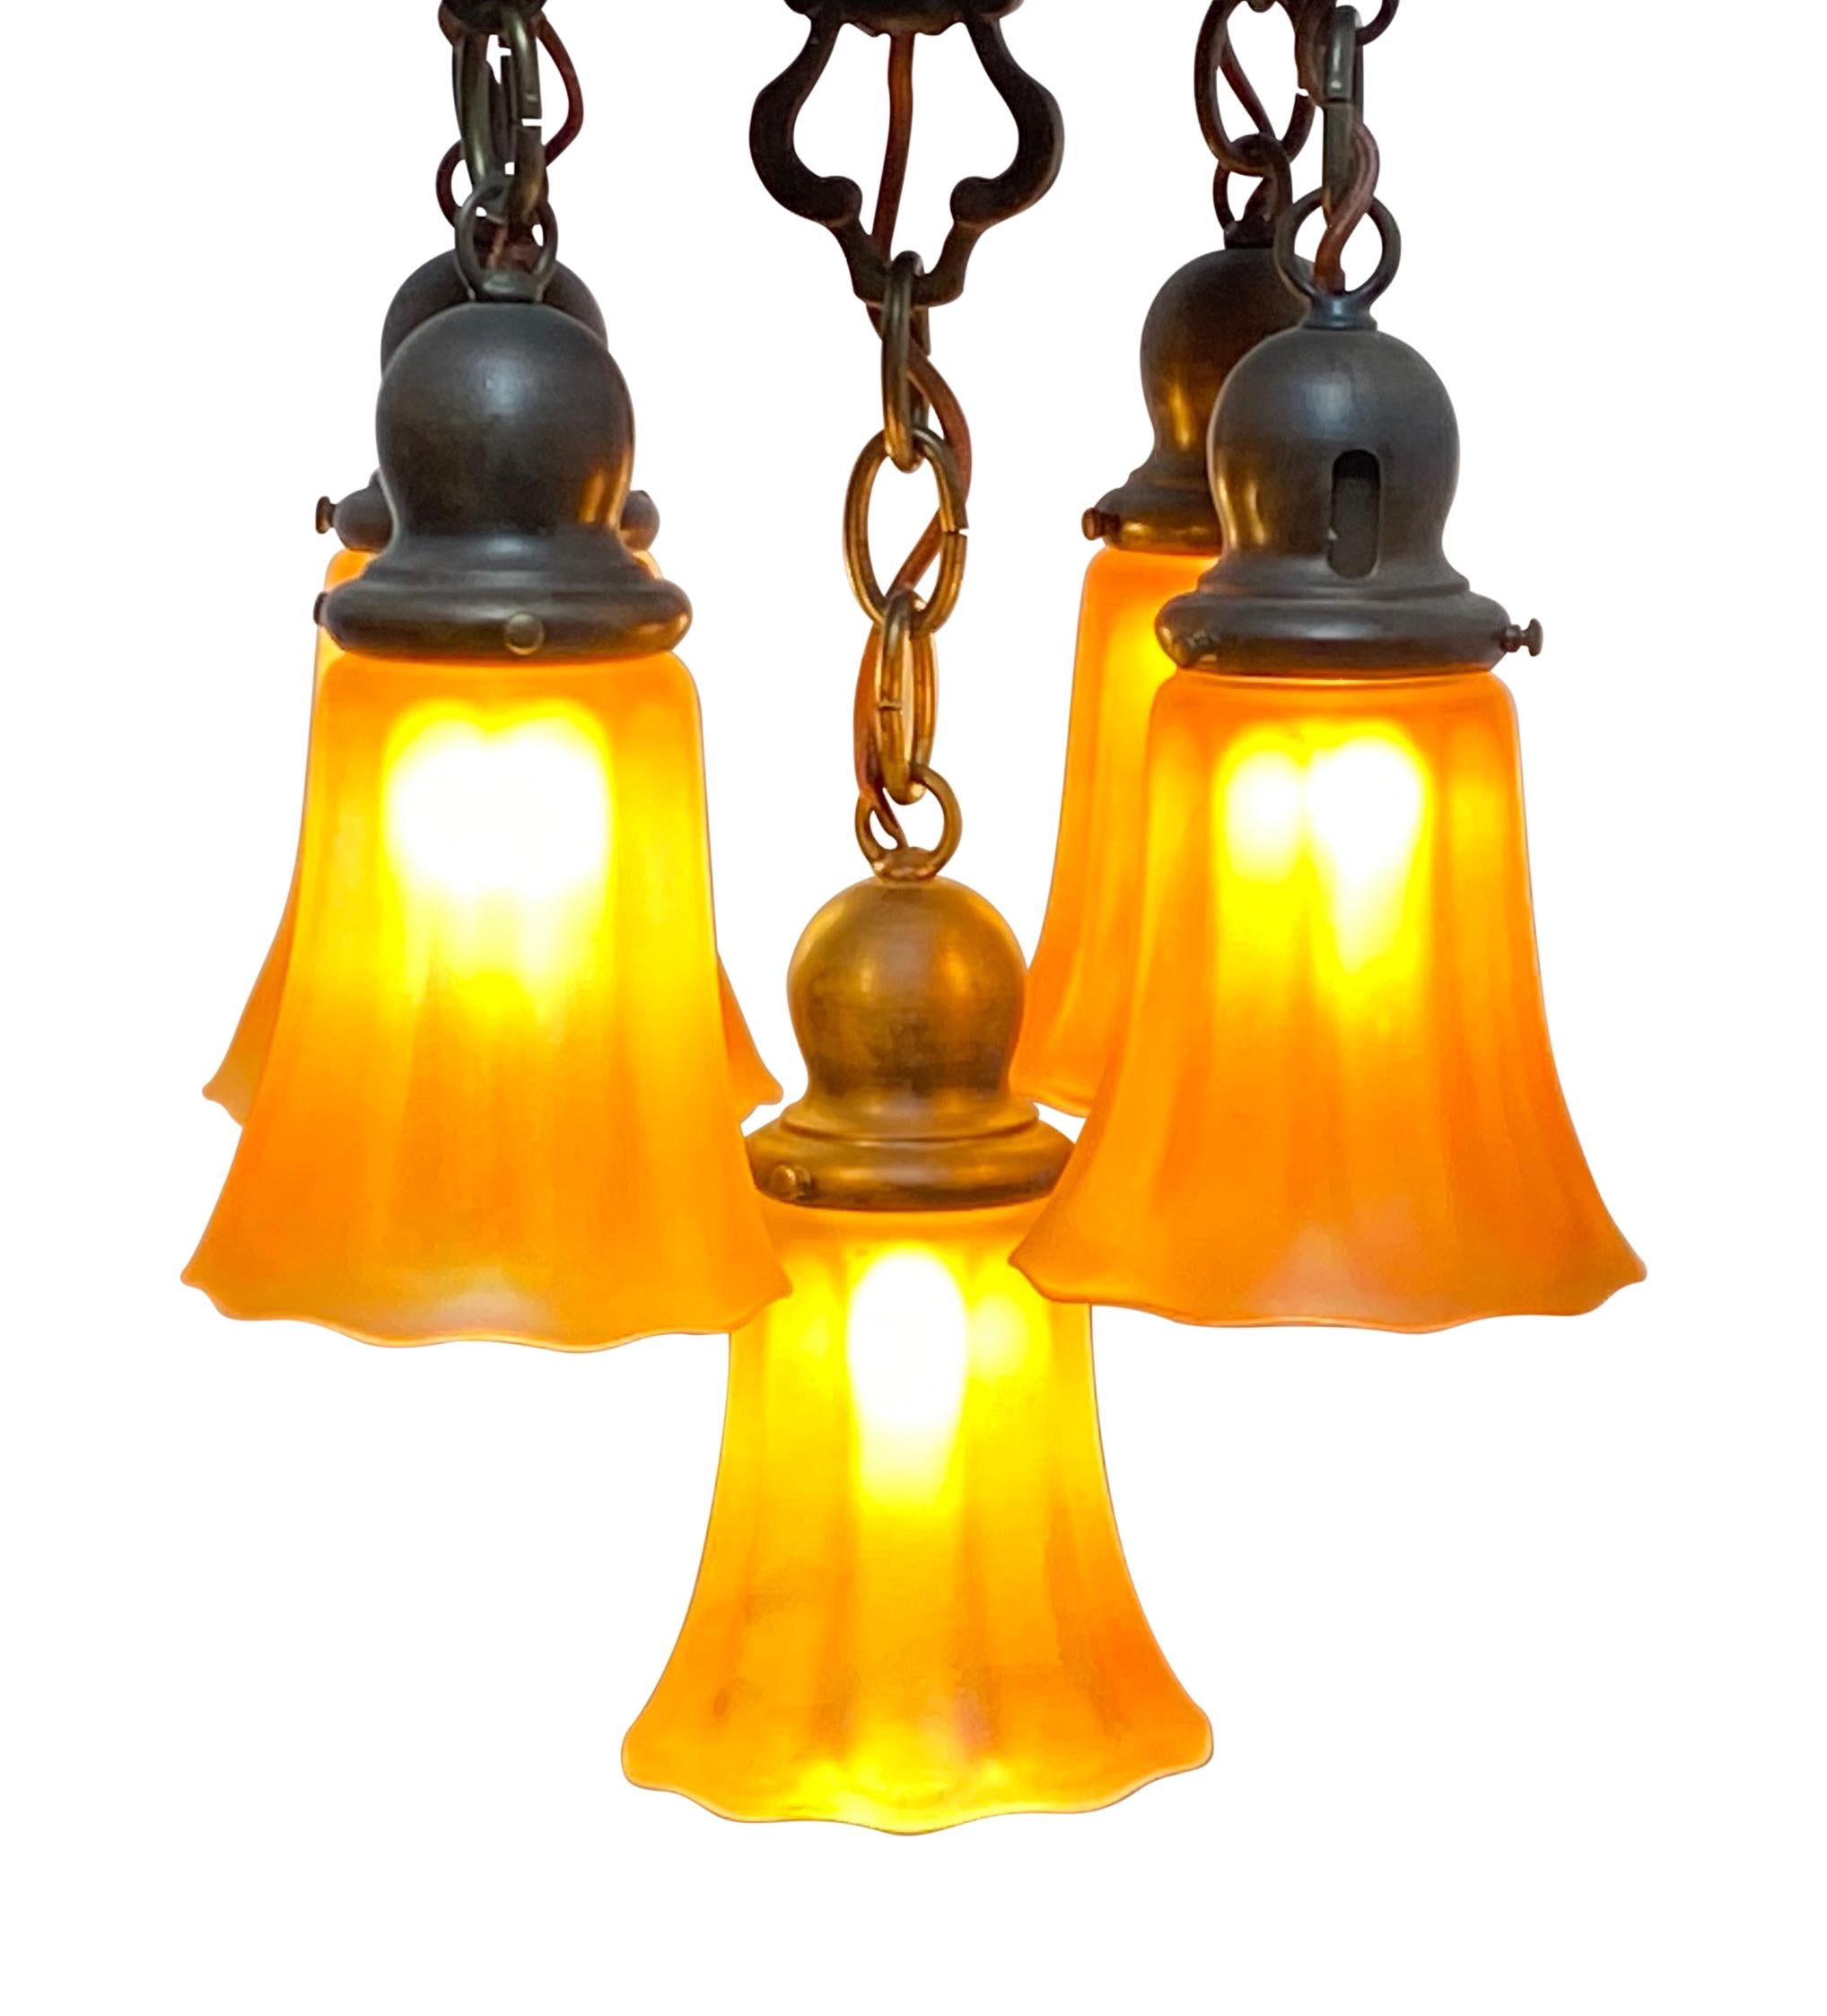 Antique Bronze and Art Glass Light Fixture, American, circa 1920 In Good Condition For Sale In San Francisco, CA